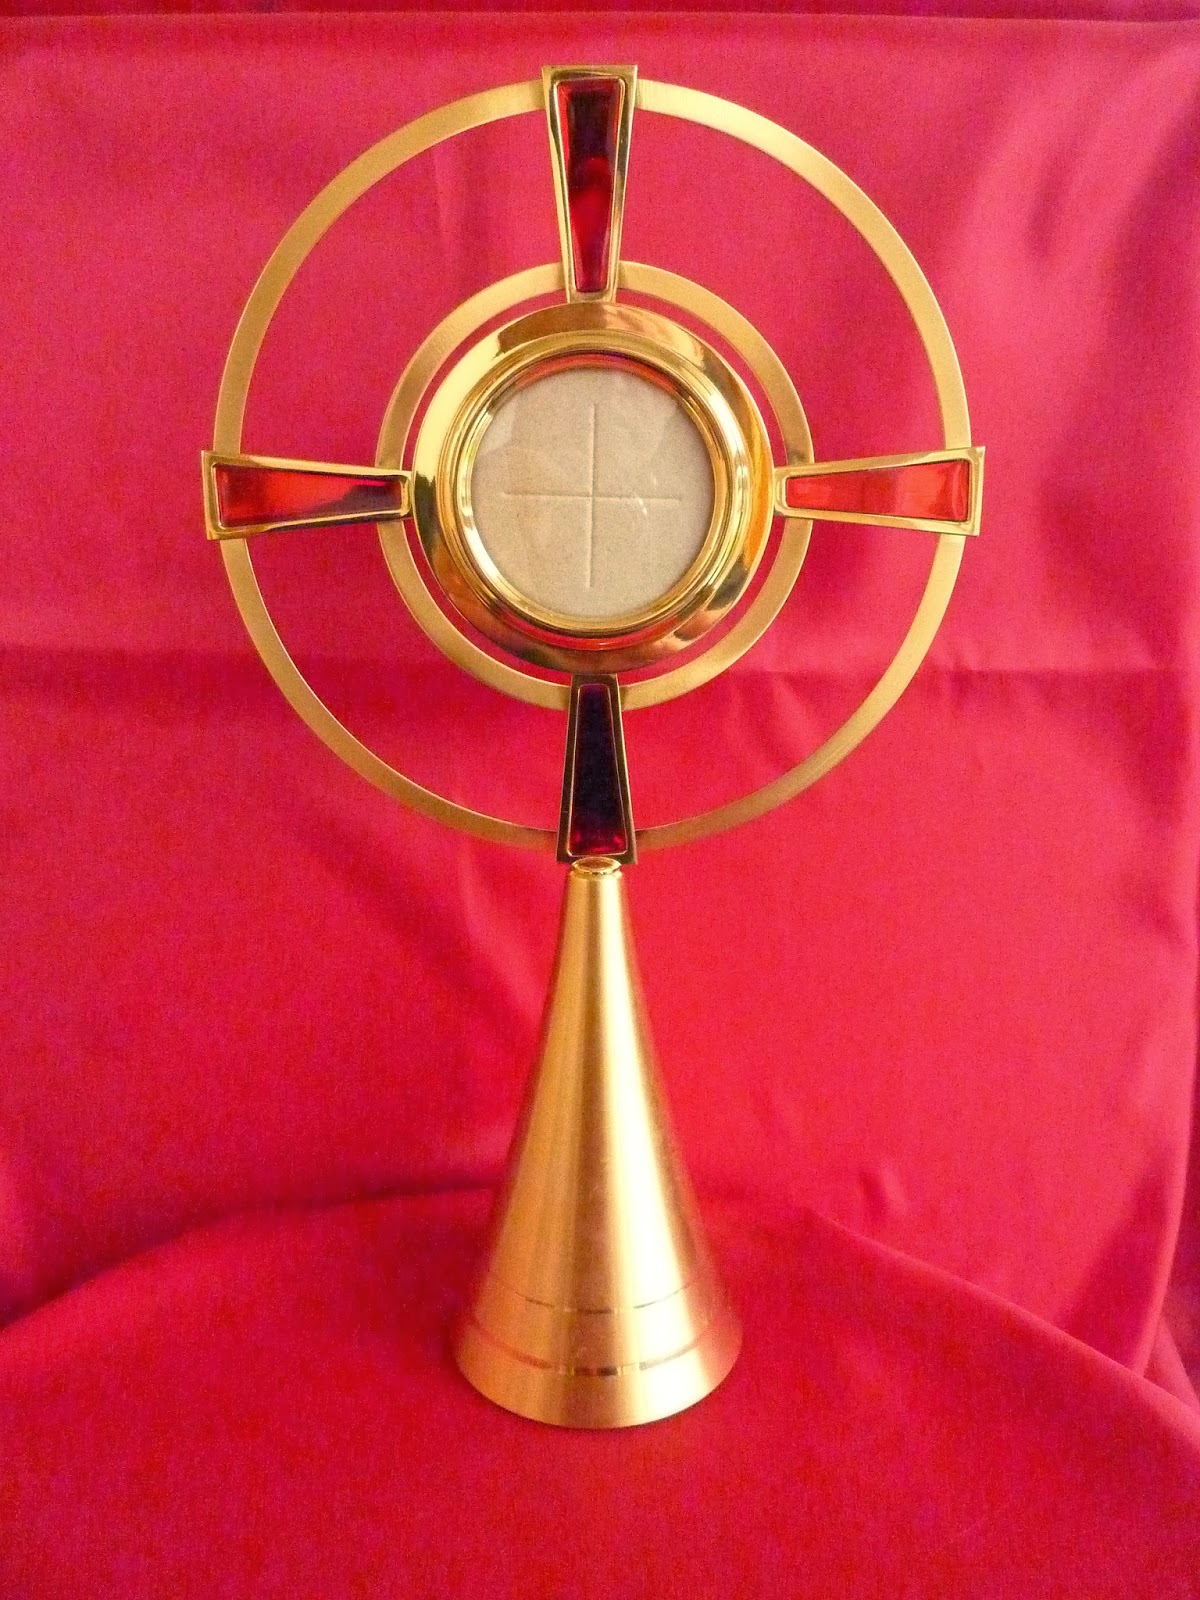 A&B News Blog: Eucharistic Adoration in the Diocese of Arundel & Brighton